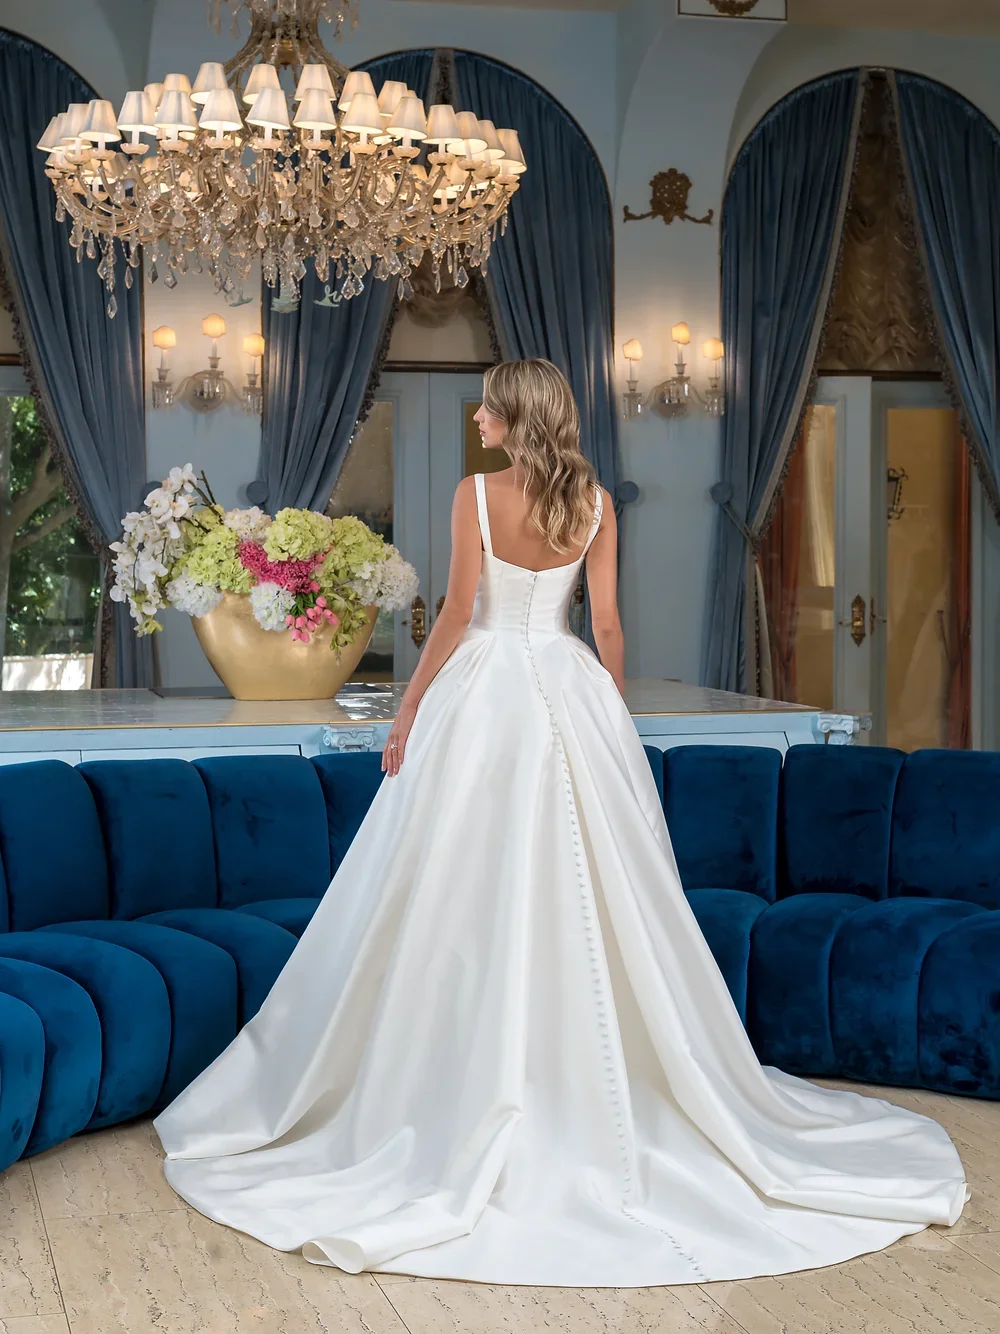 Simple And Sophisticated Ball Gown With Buttons by Estee Couture - Image 2